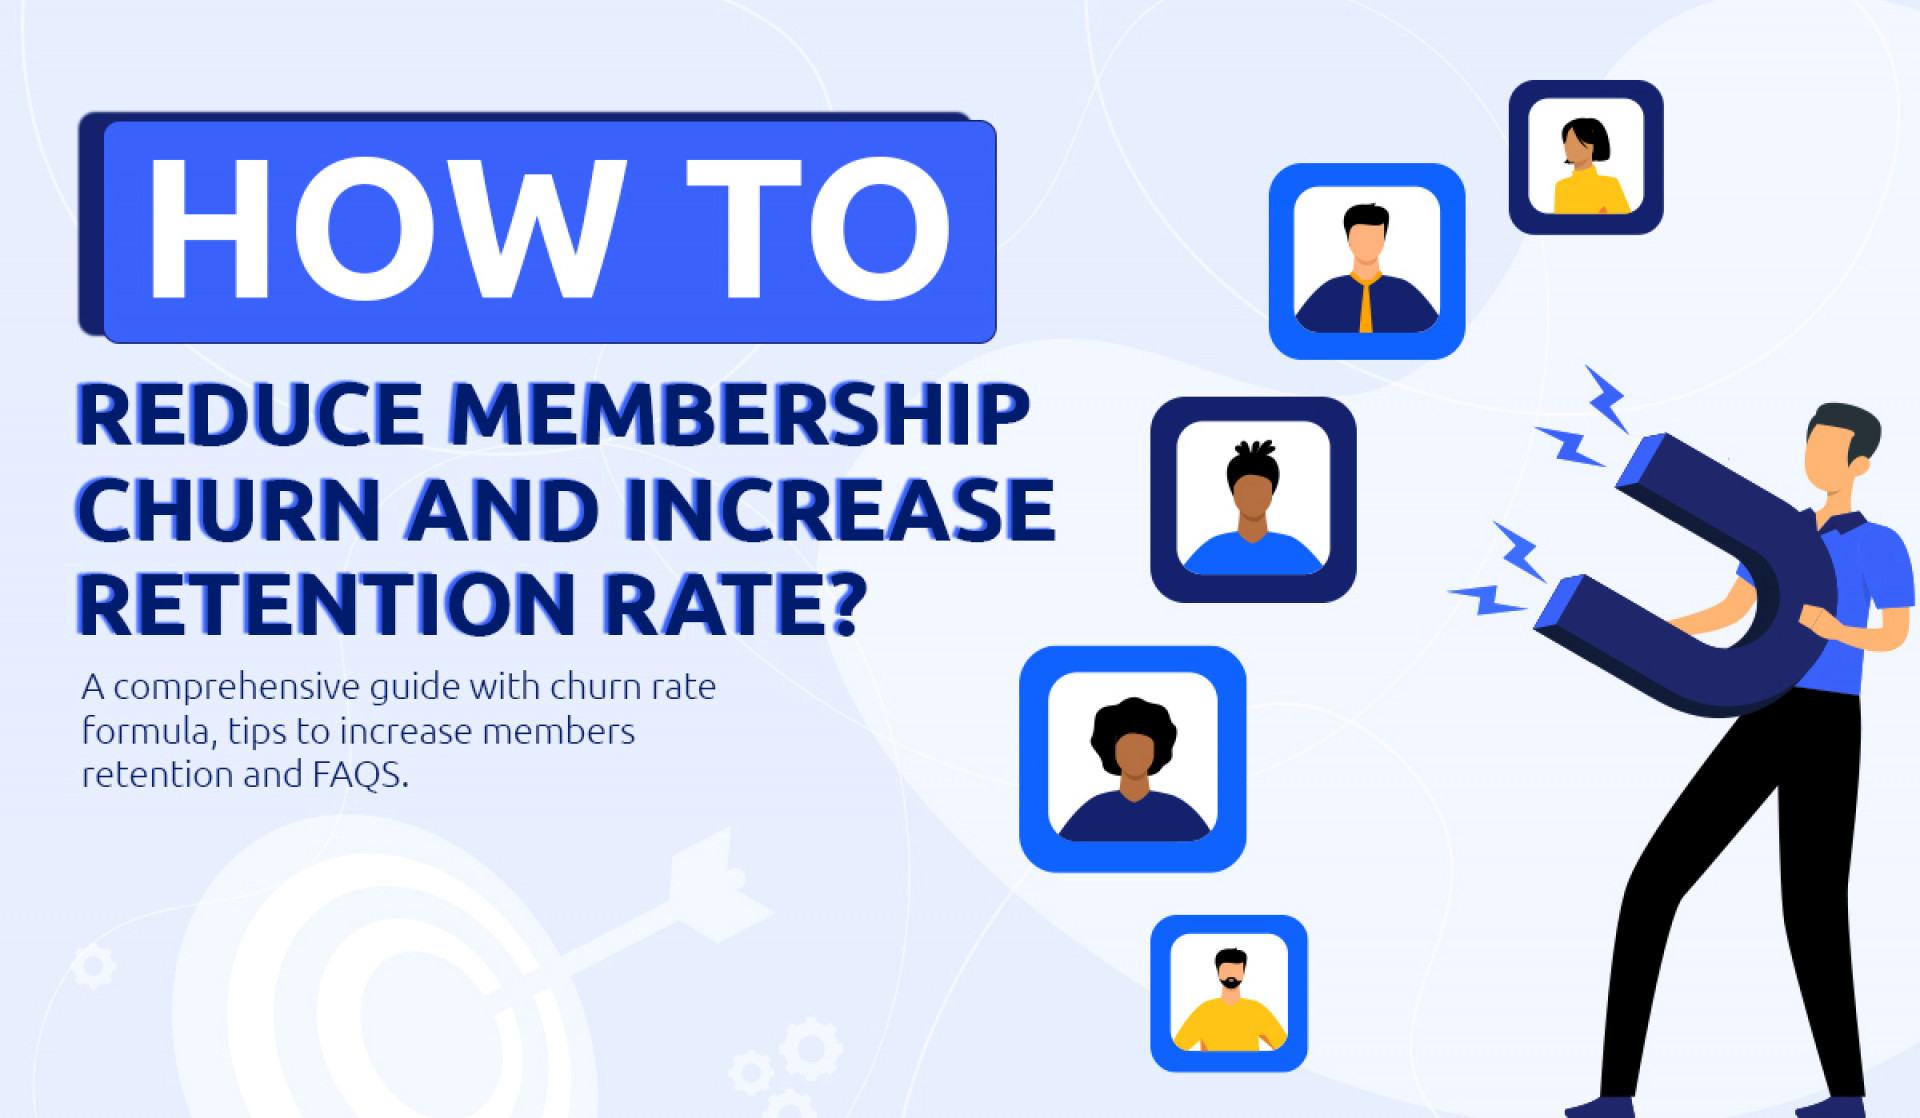 How to Reduce Membership Churn and Increase Retention Rate? [A Comprehensive Guide With Churn Rate Formula, Tips to Increase Members’ Retention, and FAQS]